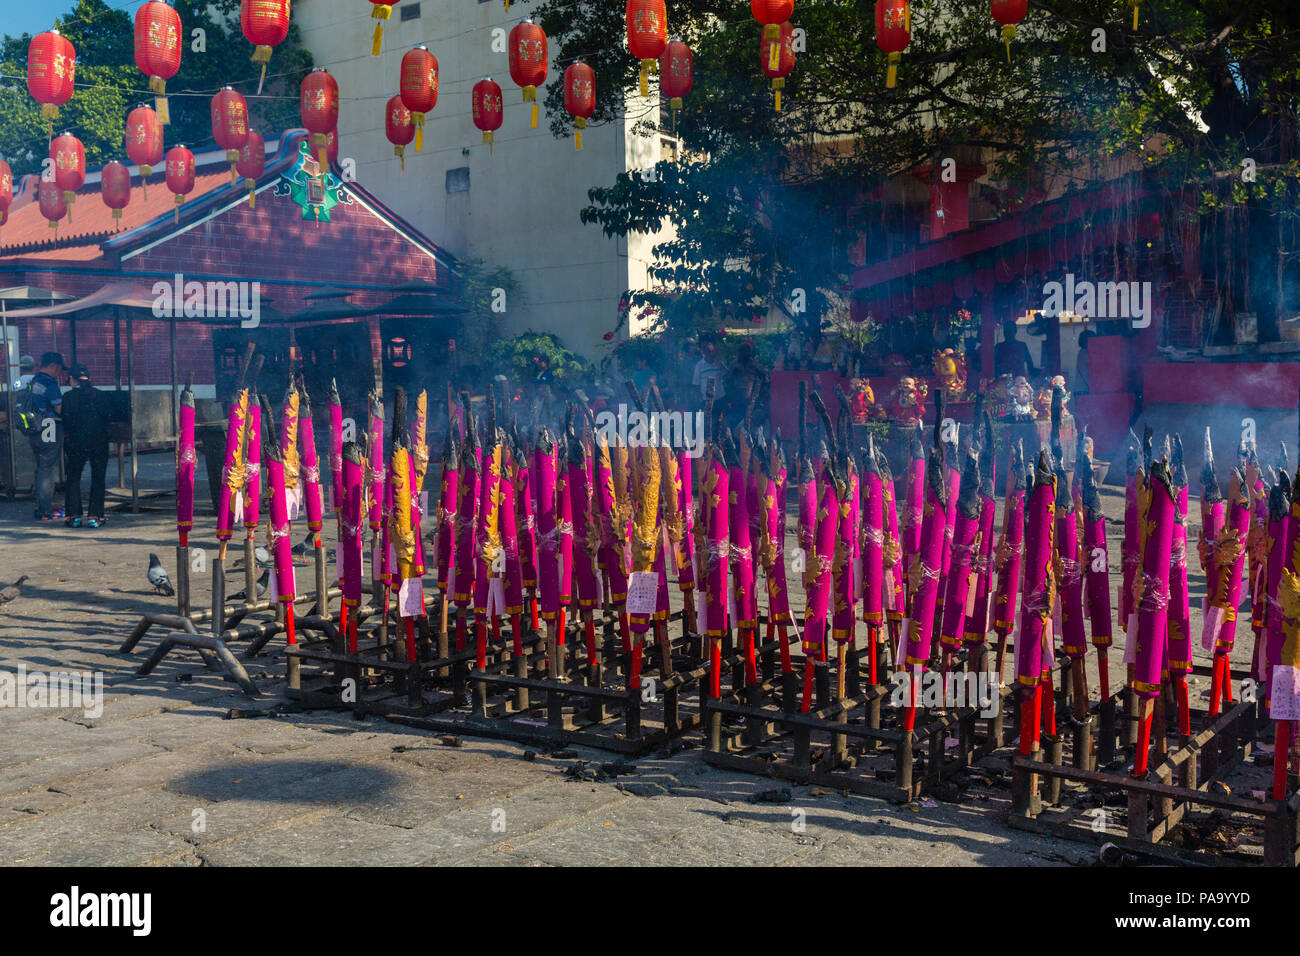 Incense sticks burining as offerings at the Goddess of Mercy Temple, Penang, Malaysia Stock Photo